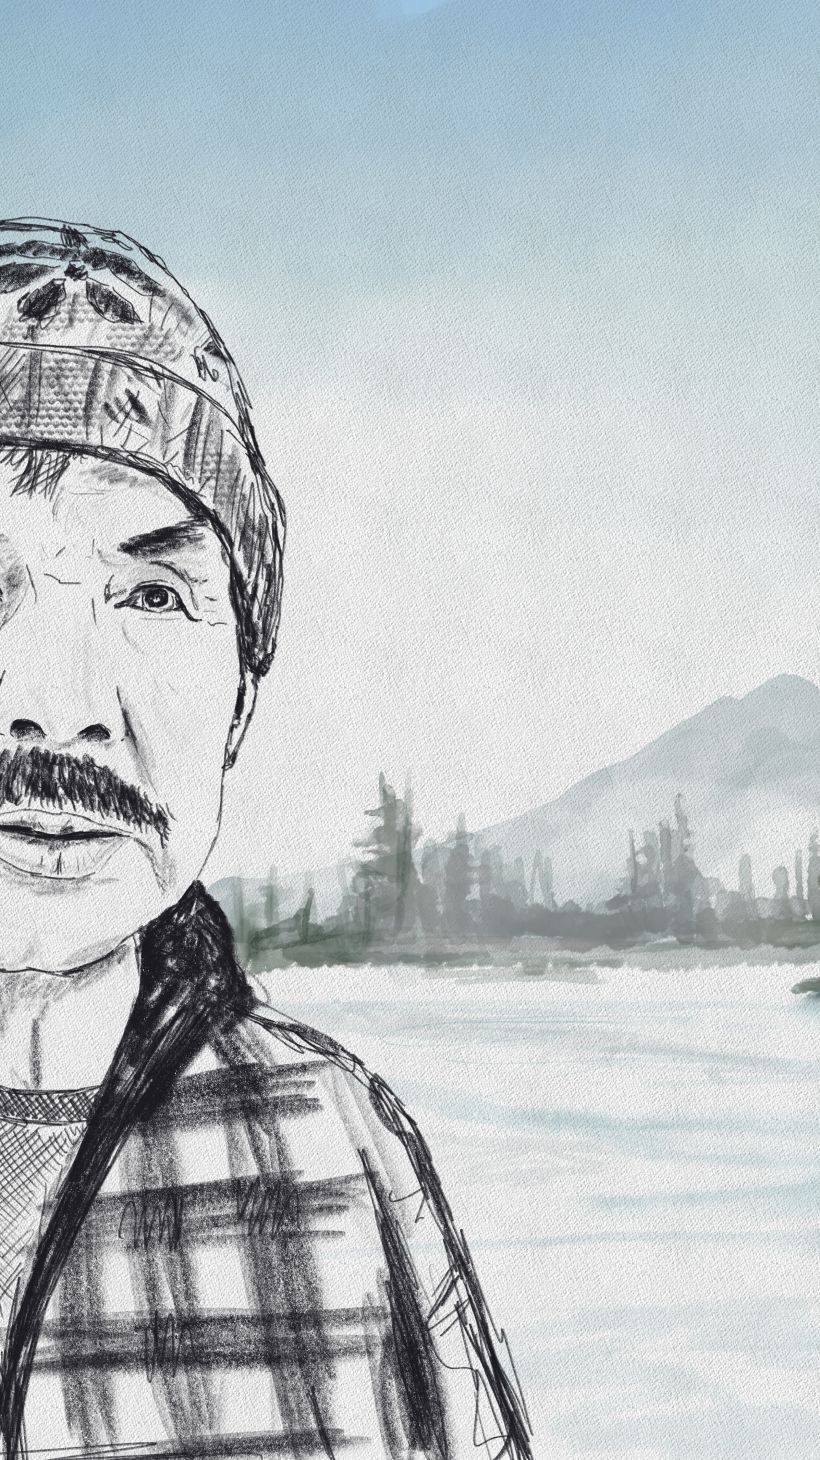 An illustration shows Chief Gisday'wa. Snow covers the large open space behind him and there are fir trees and mountains in the distance.